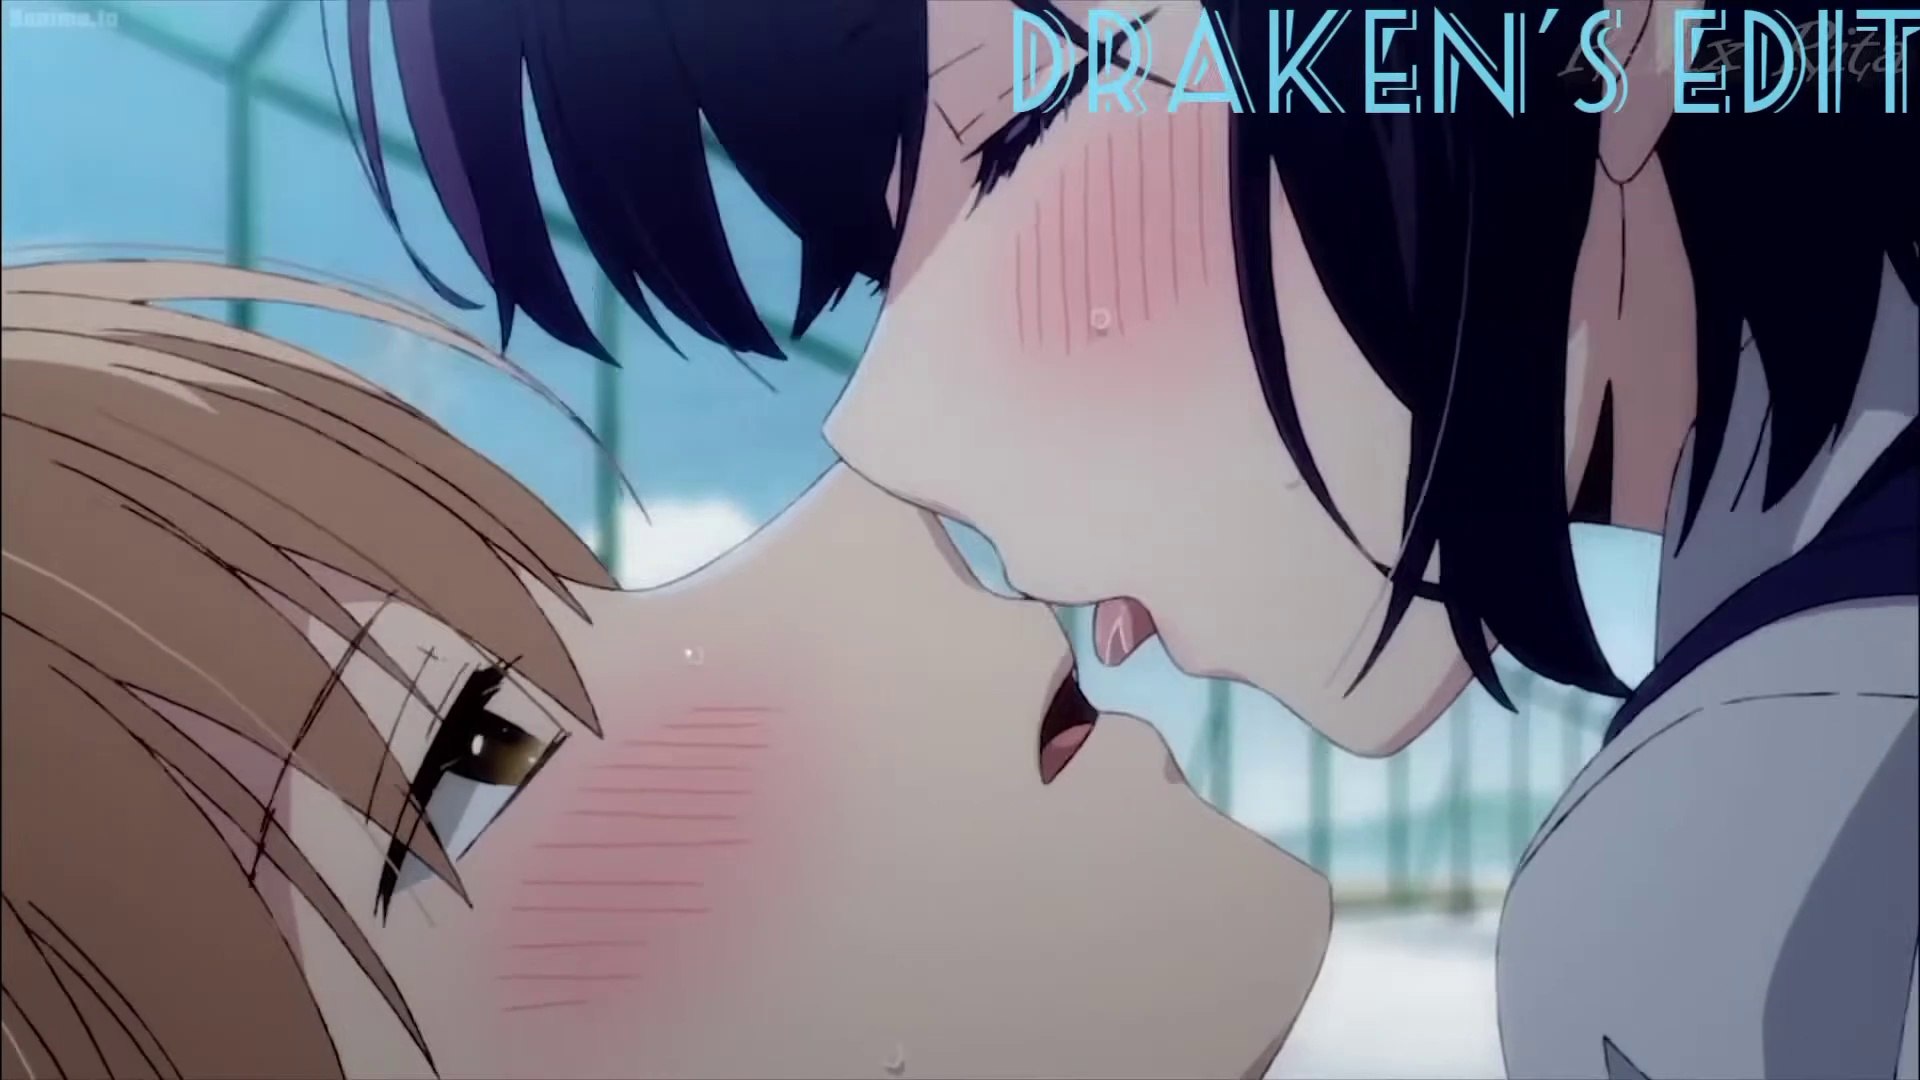 Top 20 Best Anime Kisses of All Time - video Dailymotion